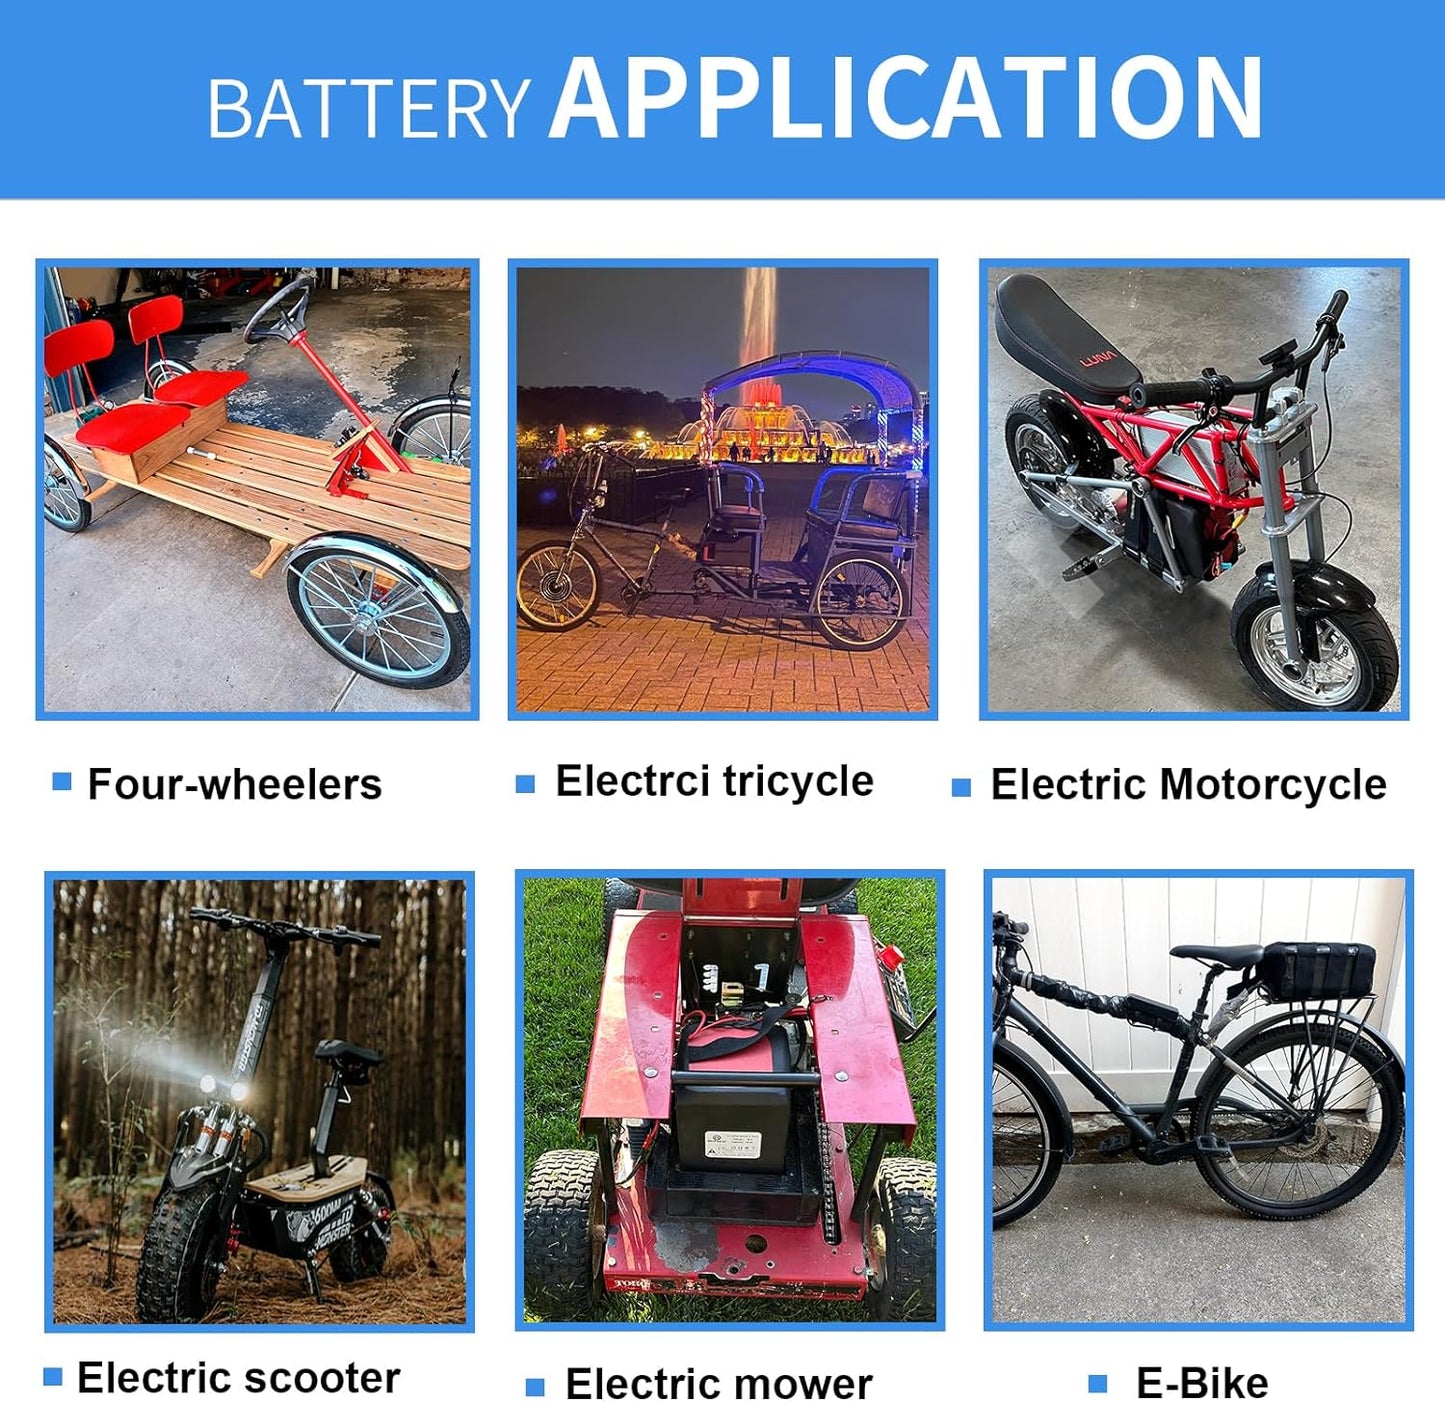 BtrPower Ebike Battery 48V 30AH LiFePO4 Battery Pack with 5A Charger, 50A BMS